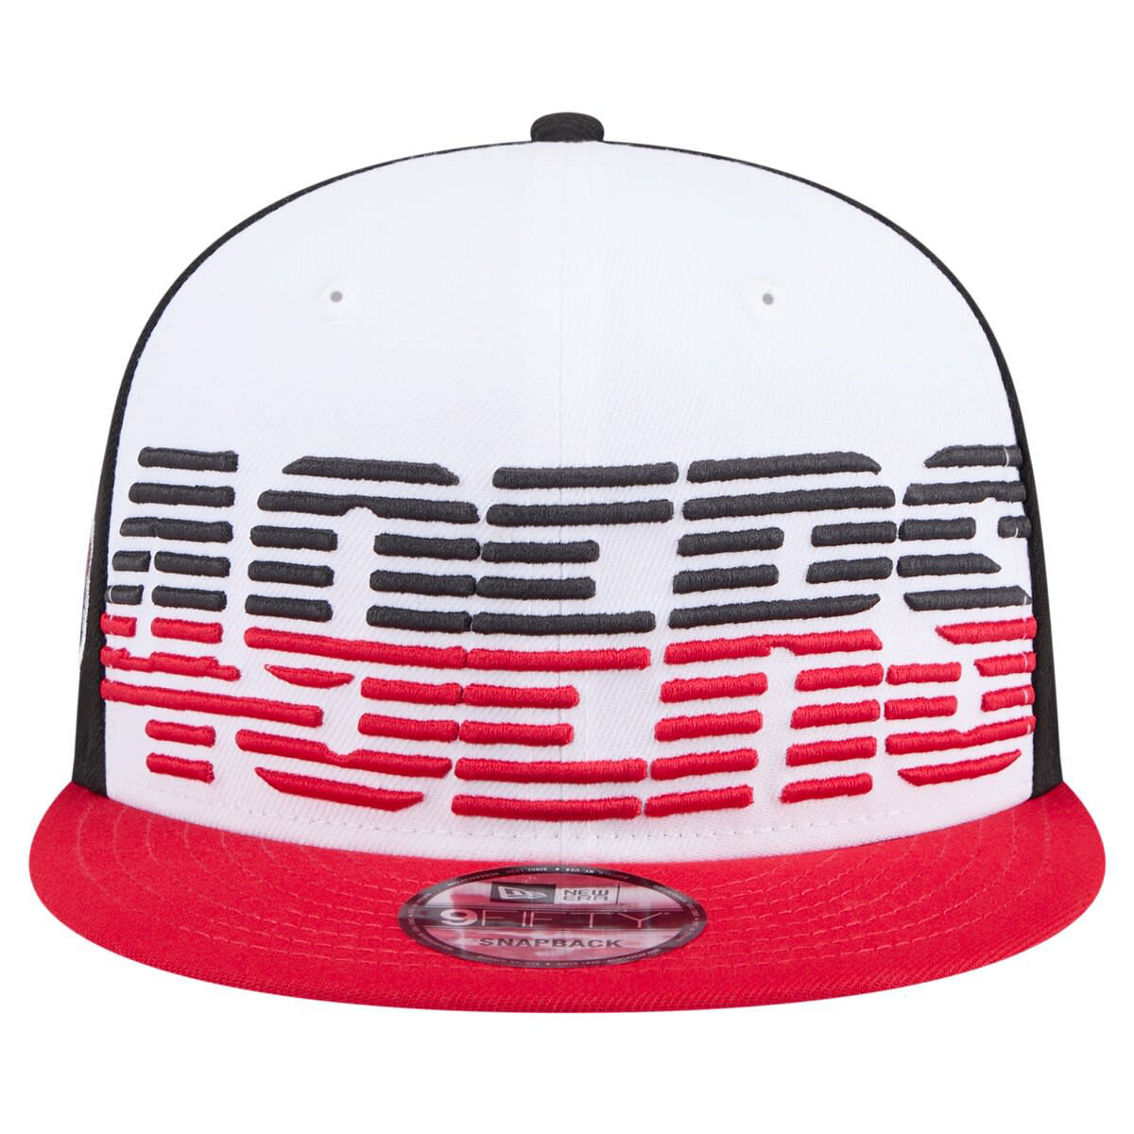 New Era Men's White/Scarlet San Francisco 49ers Throwback Space 9FIFTY Snapback Hat - Image 3 of 4